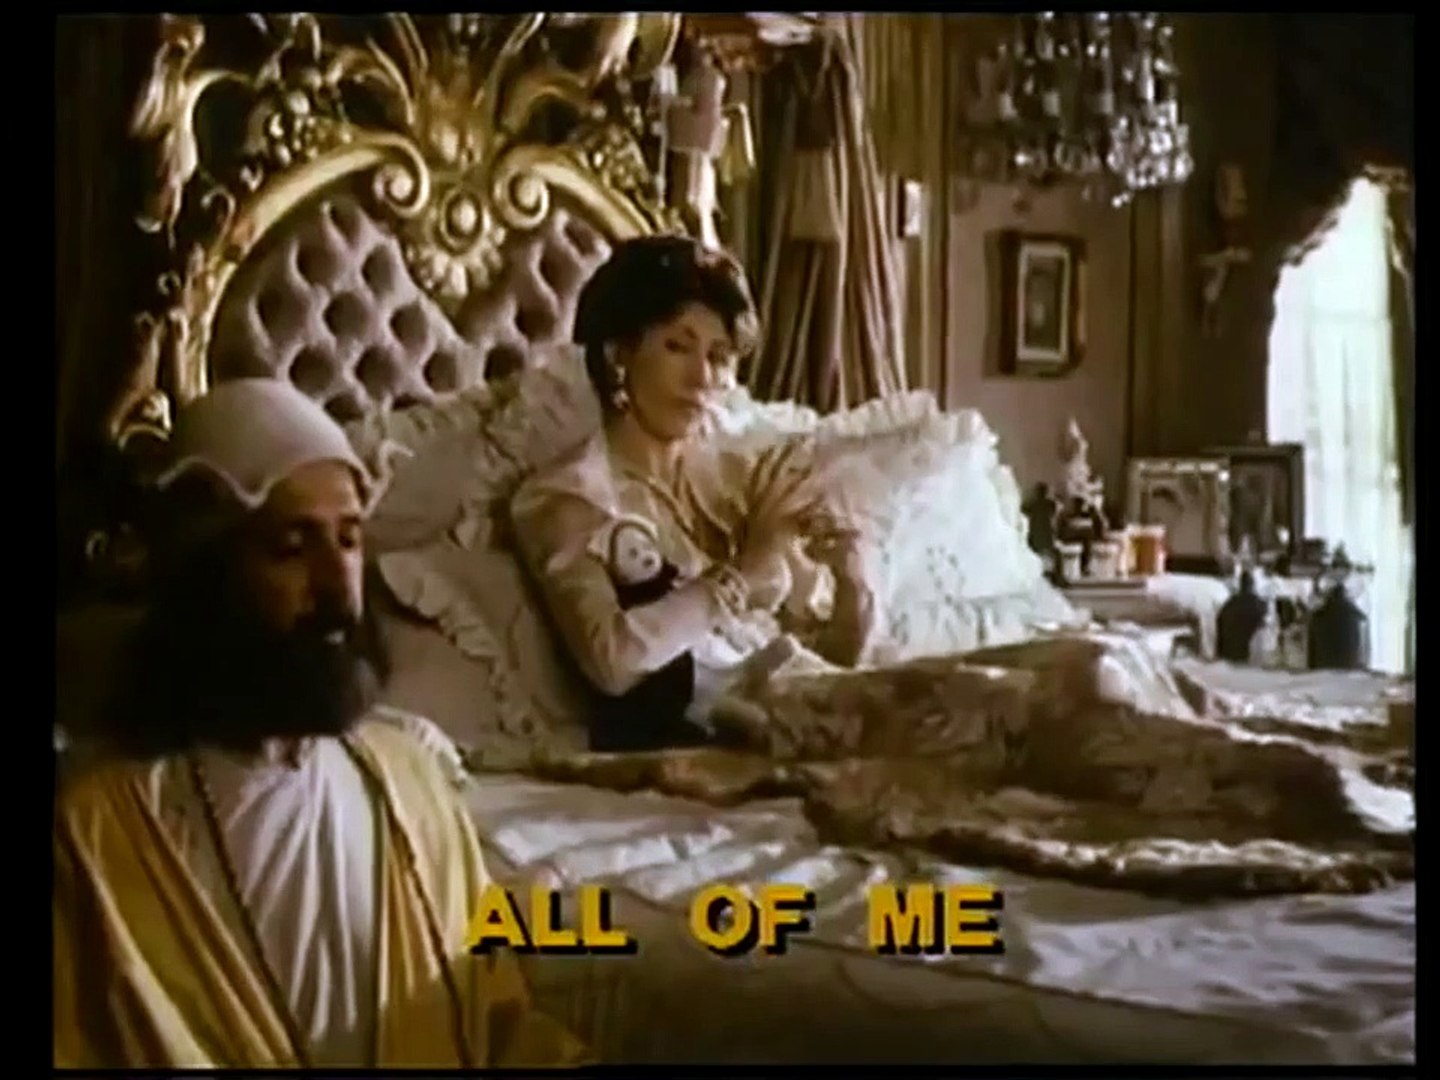 All Of Me movie (1984) - Steve Martin, Lily Tomlin - video Dailymotion